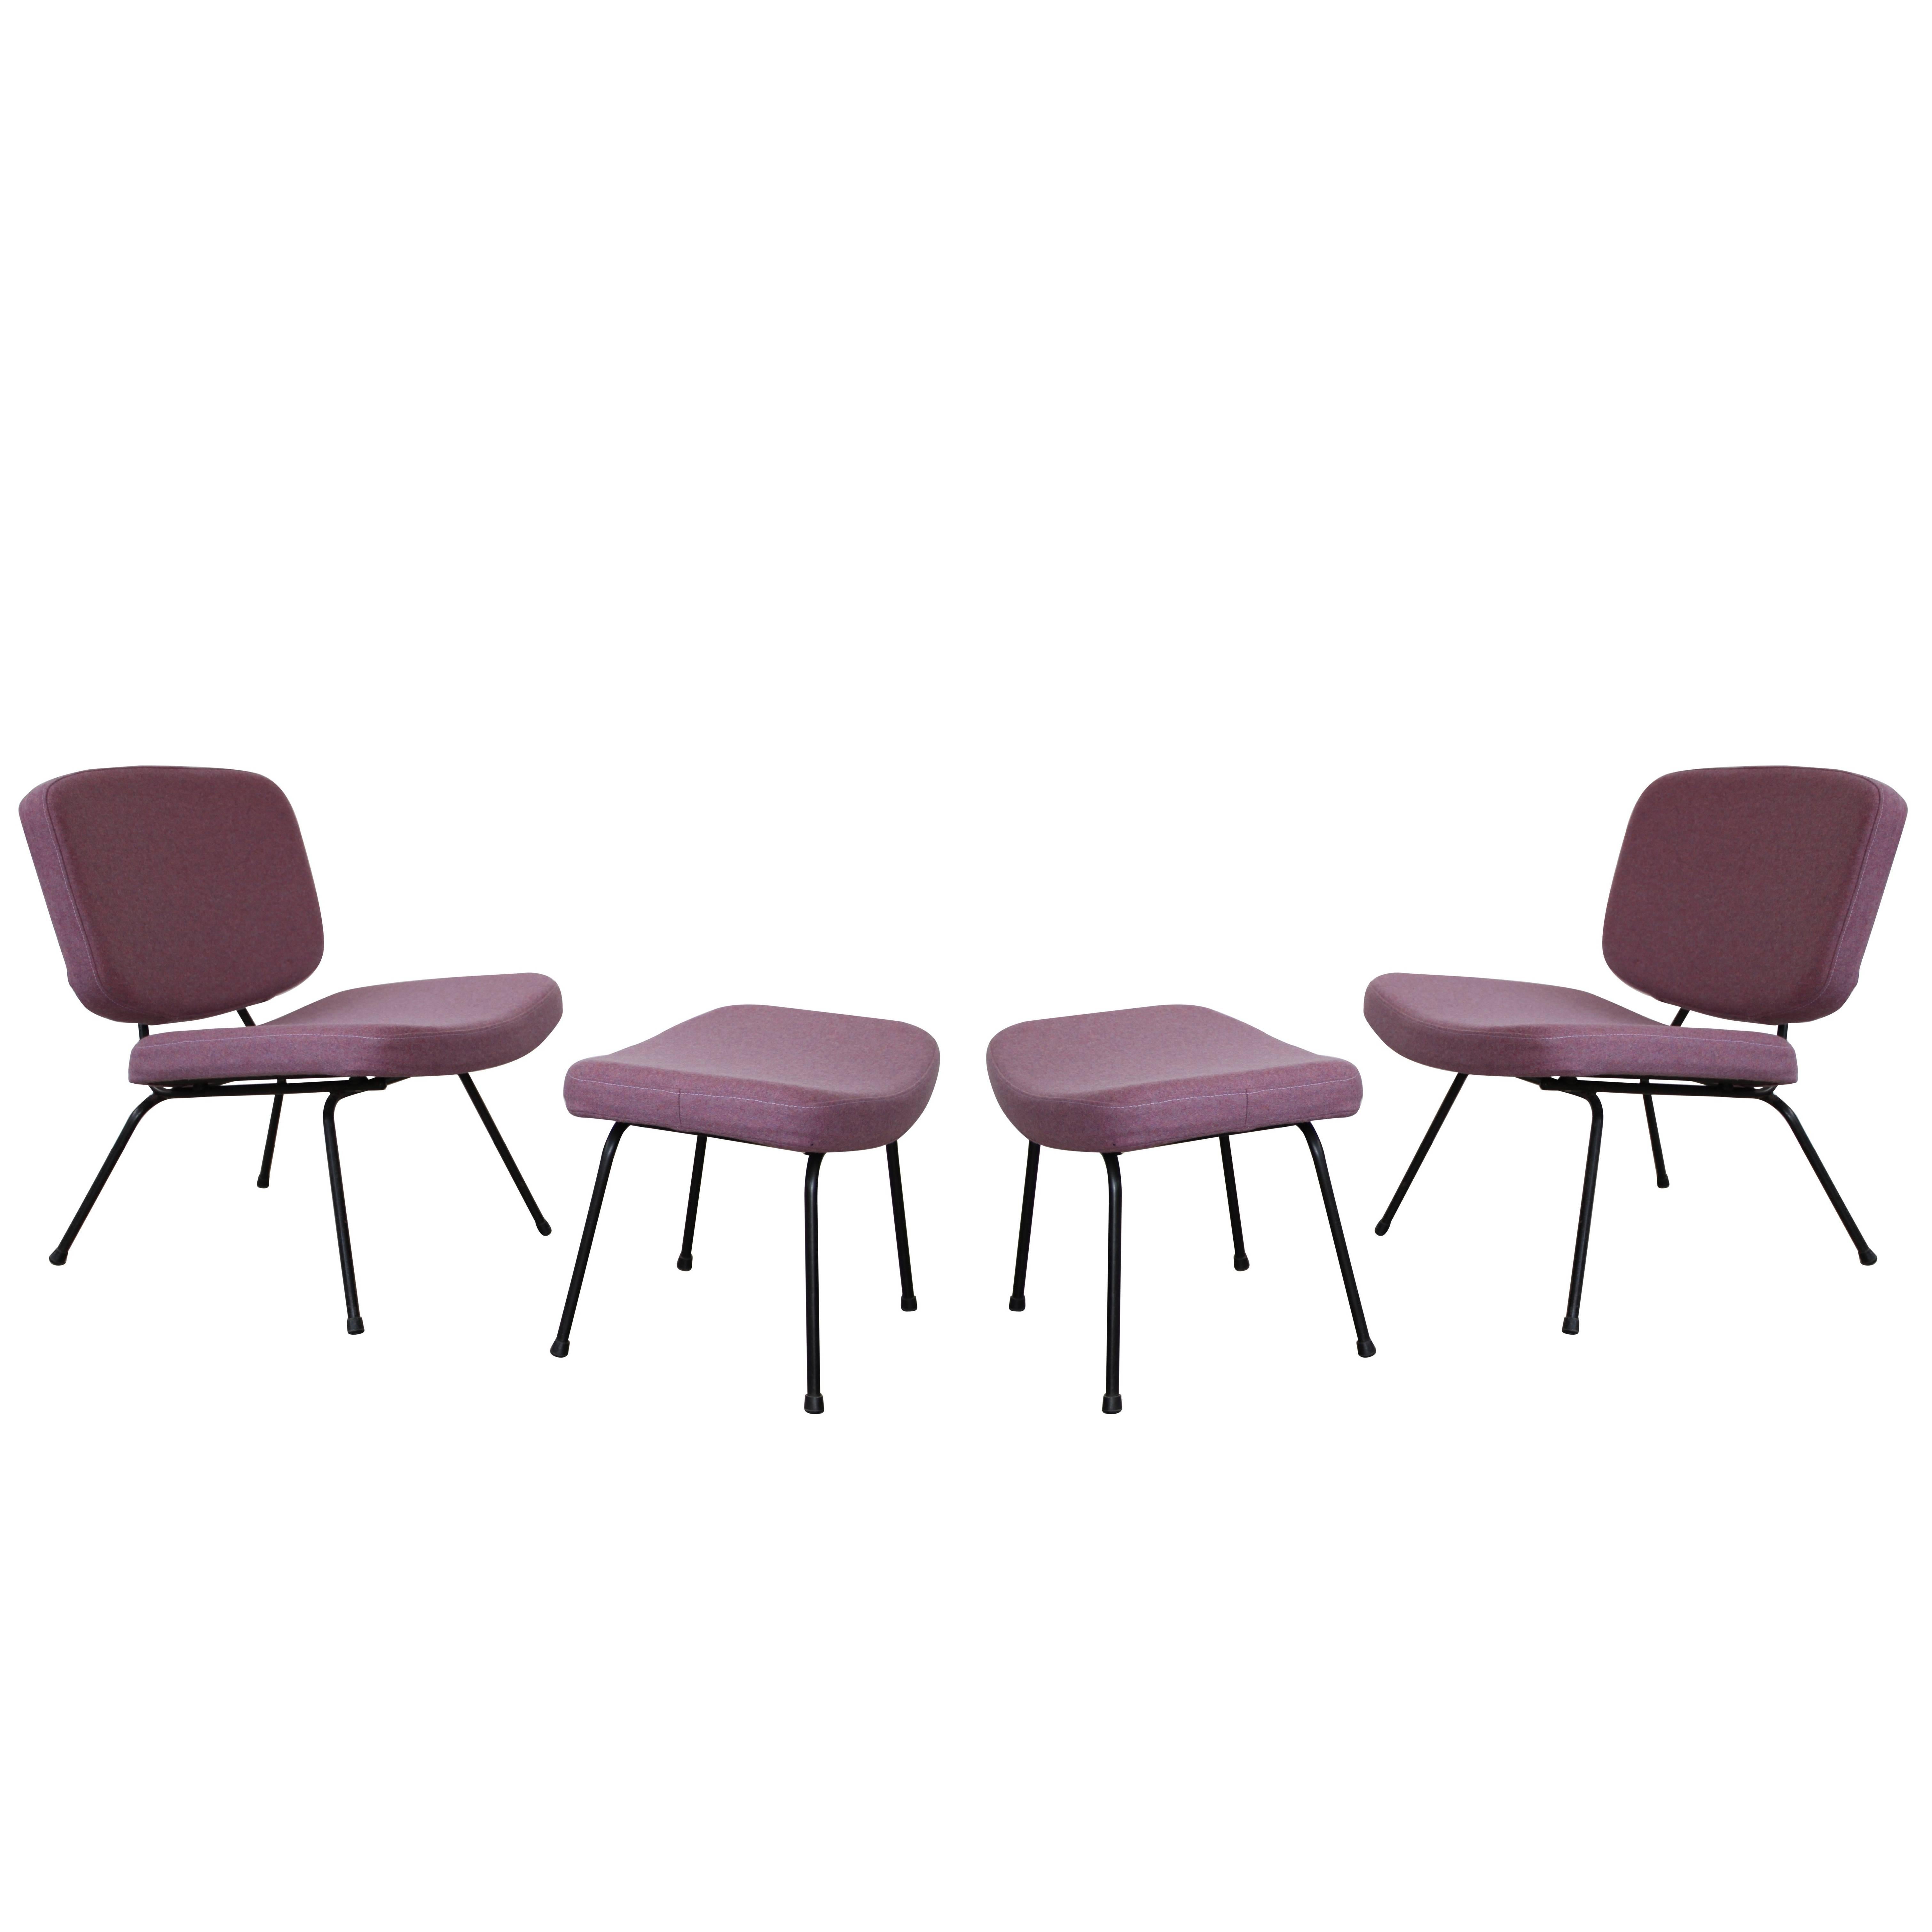 Two Sets of Lows Chairs CM190 with Footstools by Pierre Paulin for Thonet, 1959 For Sale